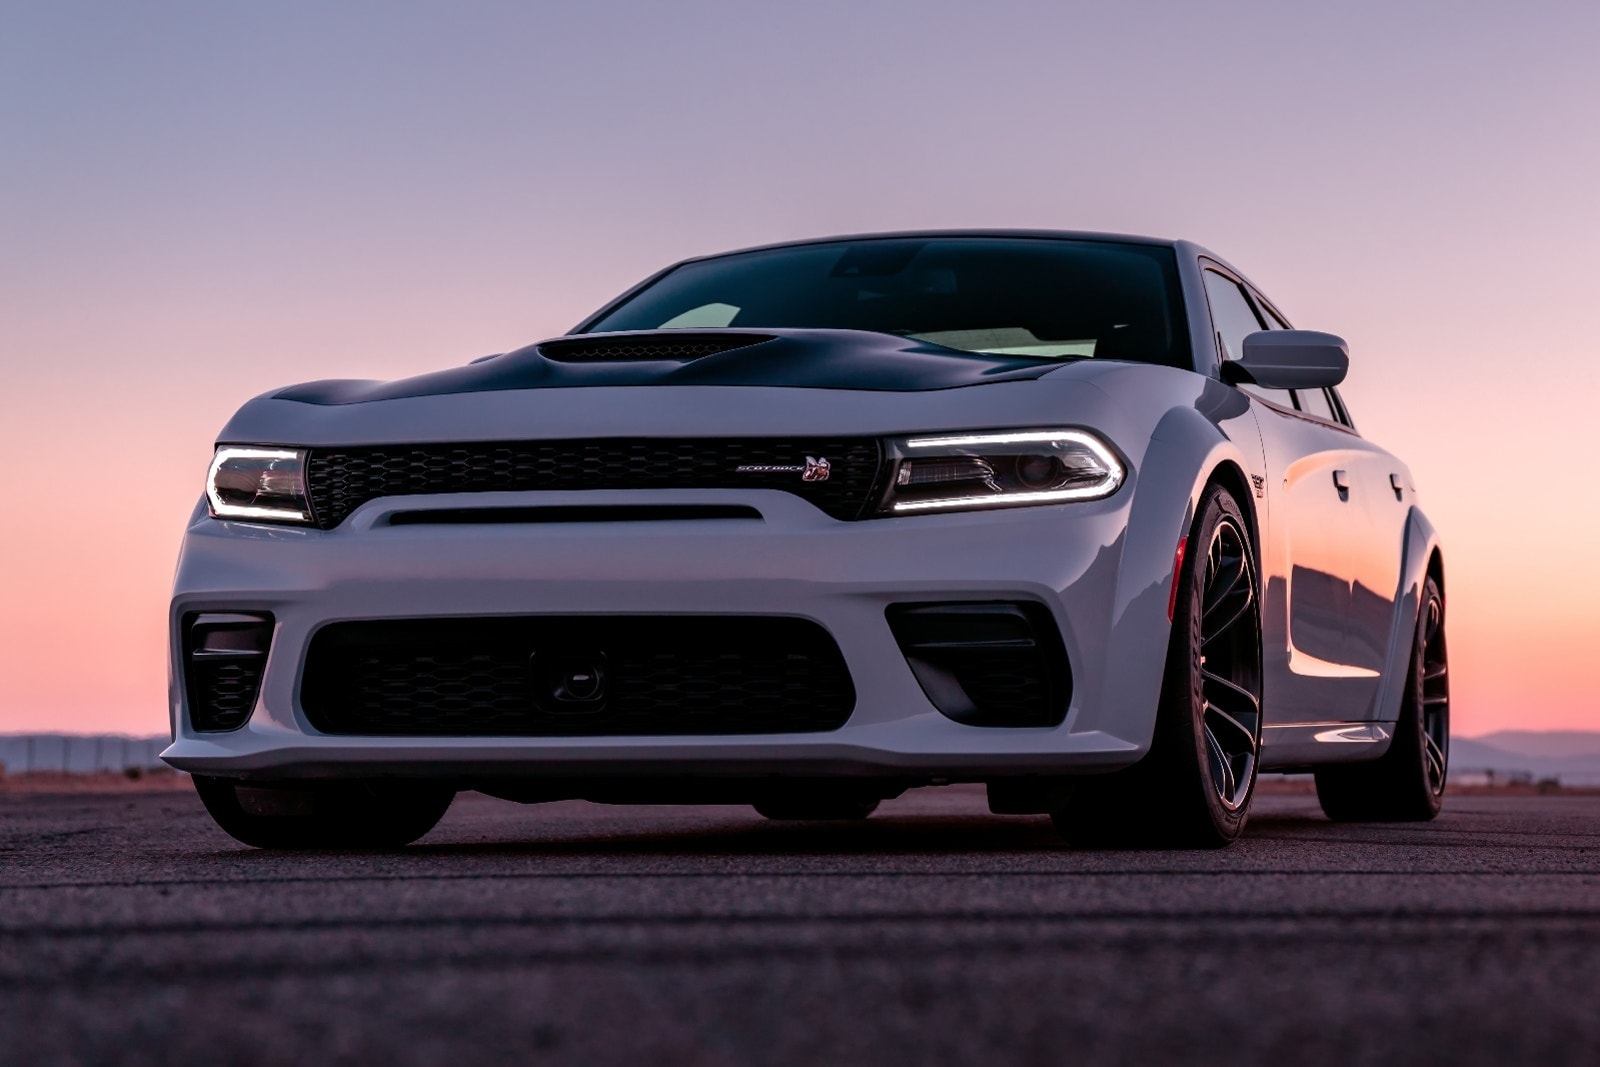 2023 Dodge Charger 392 Scat Pack in white, parked during sunset.